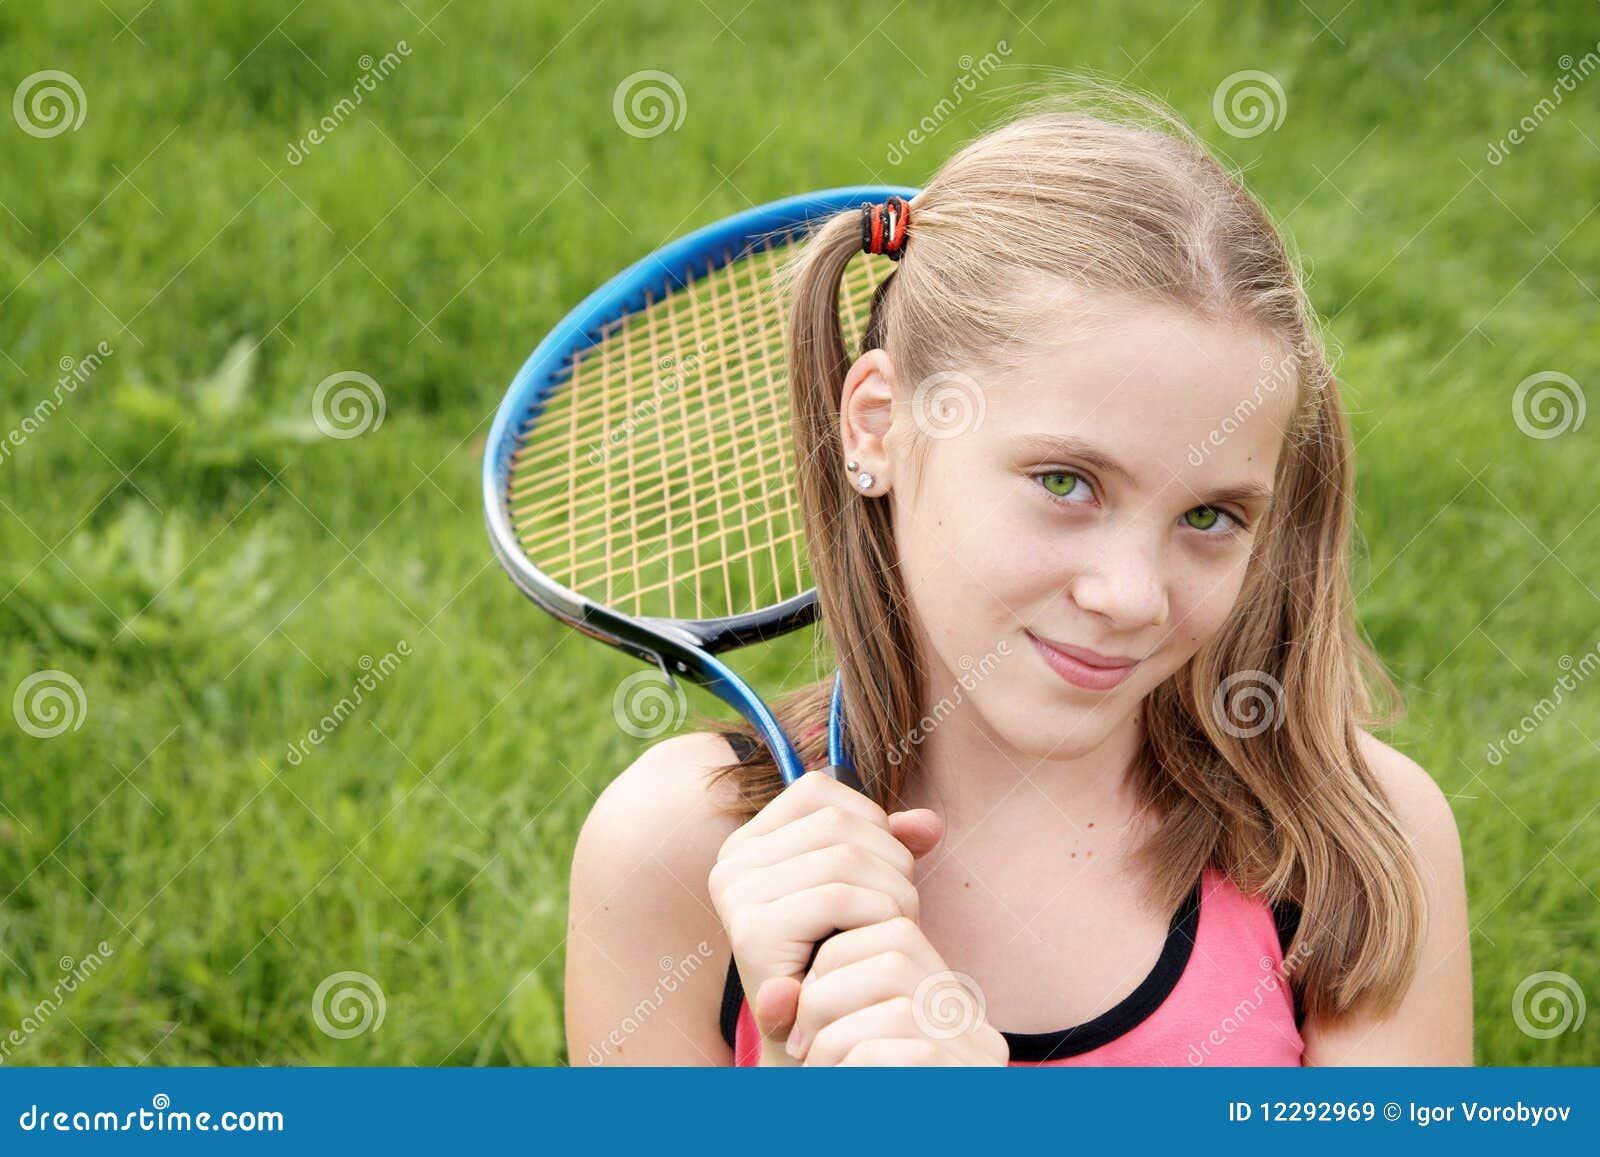 Happy Teenage Girl In Sport Outfits Holding Tennis Racket 